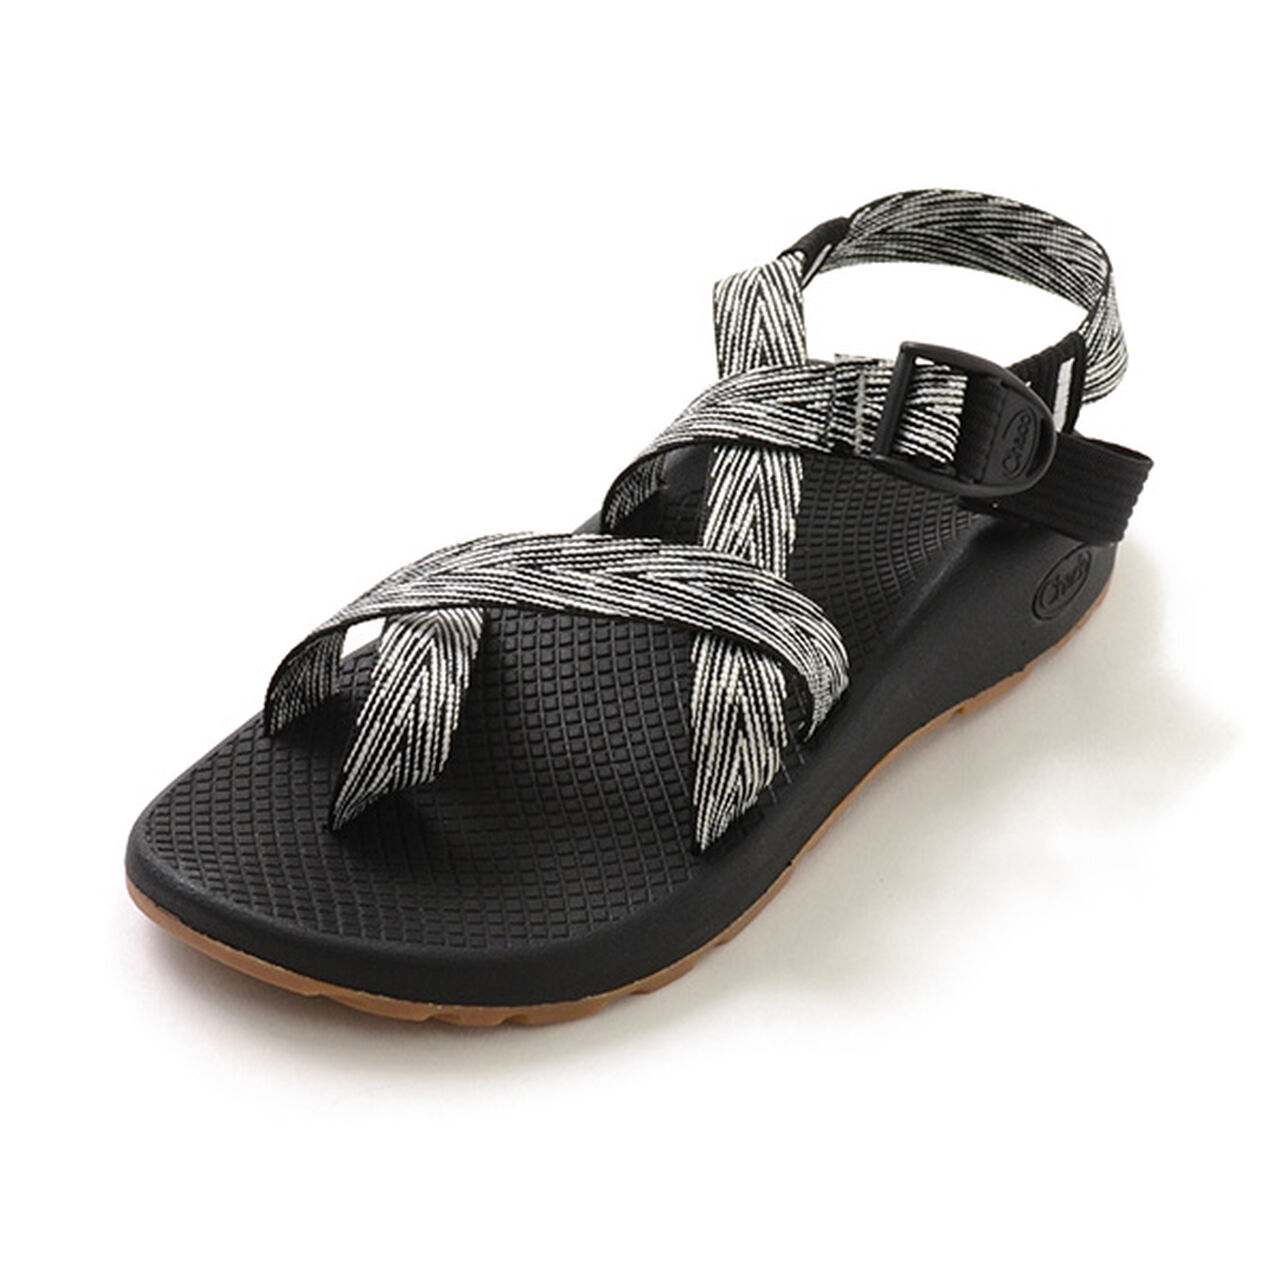 Z2 classic / Strap Sandals,TrapB+W, large image number 0